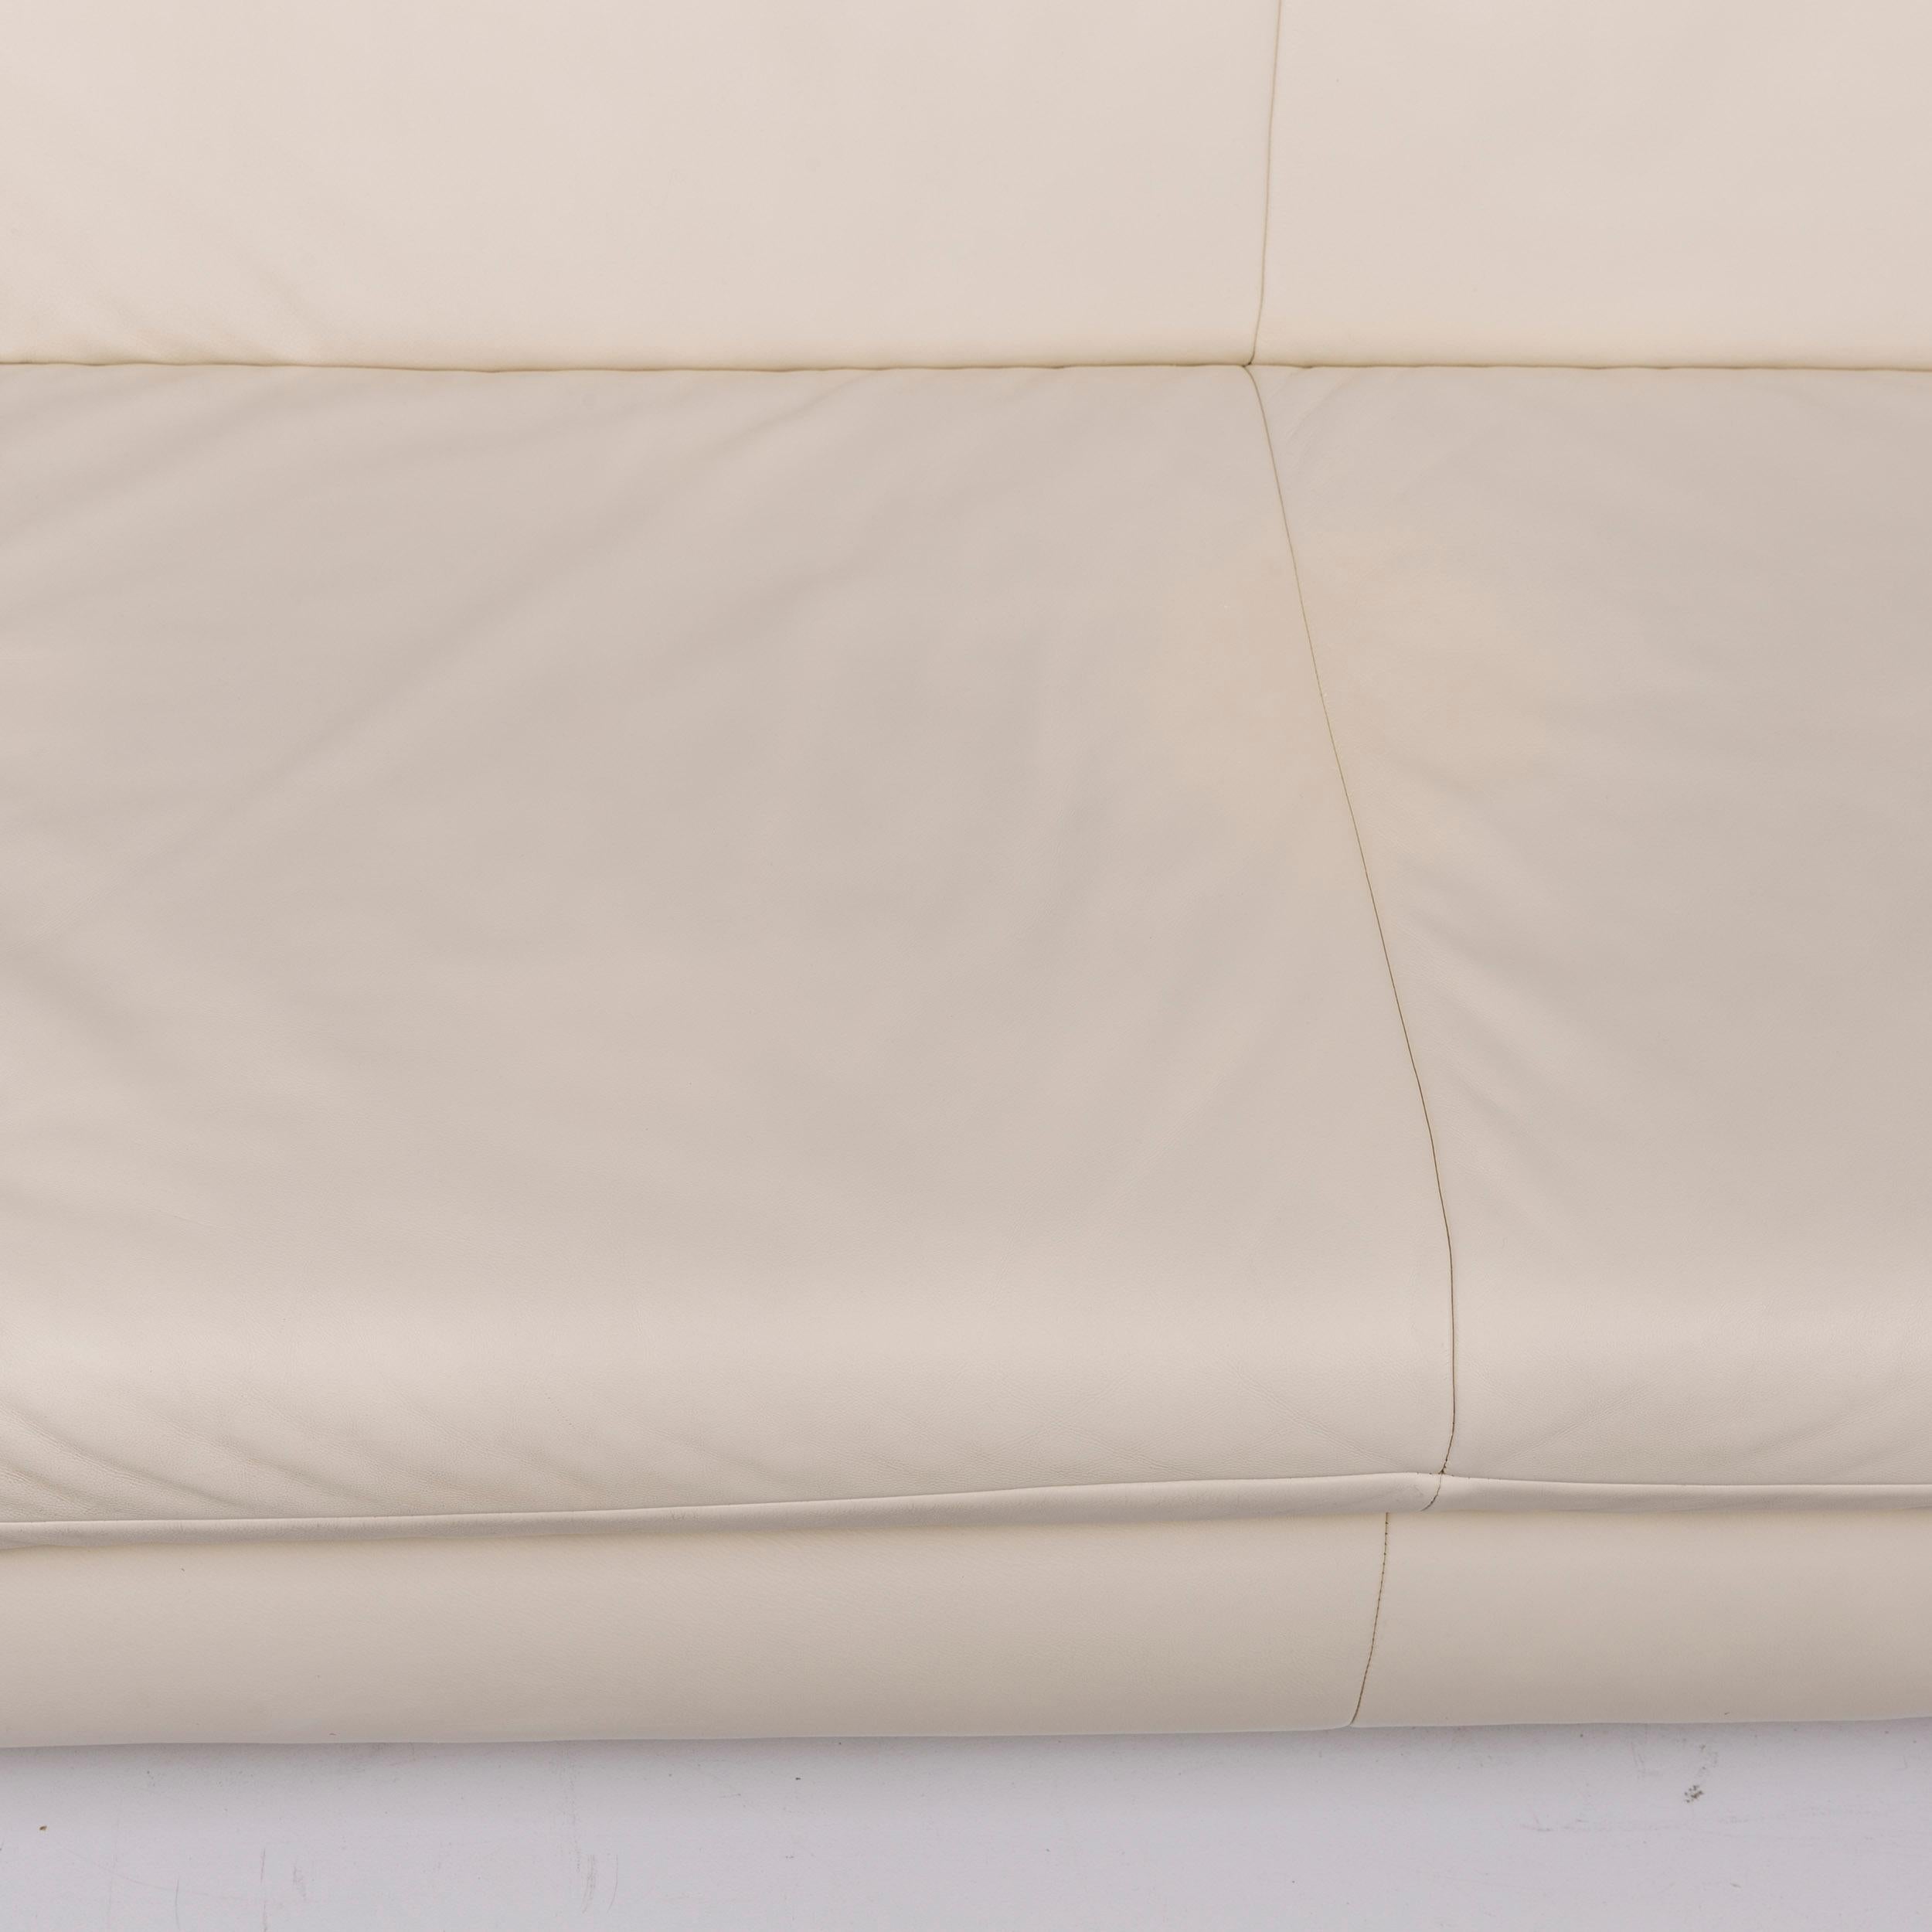 Koinor Rossini Leather Cream Sofa Two-Seat Function Couch In Good Condition For Sale In Cologne, DE